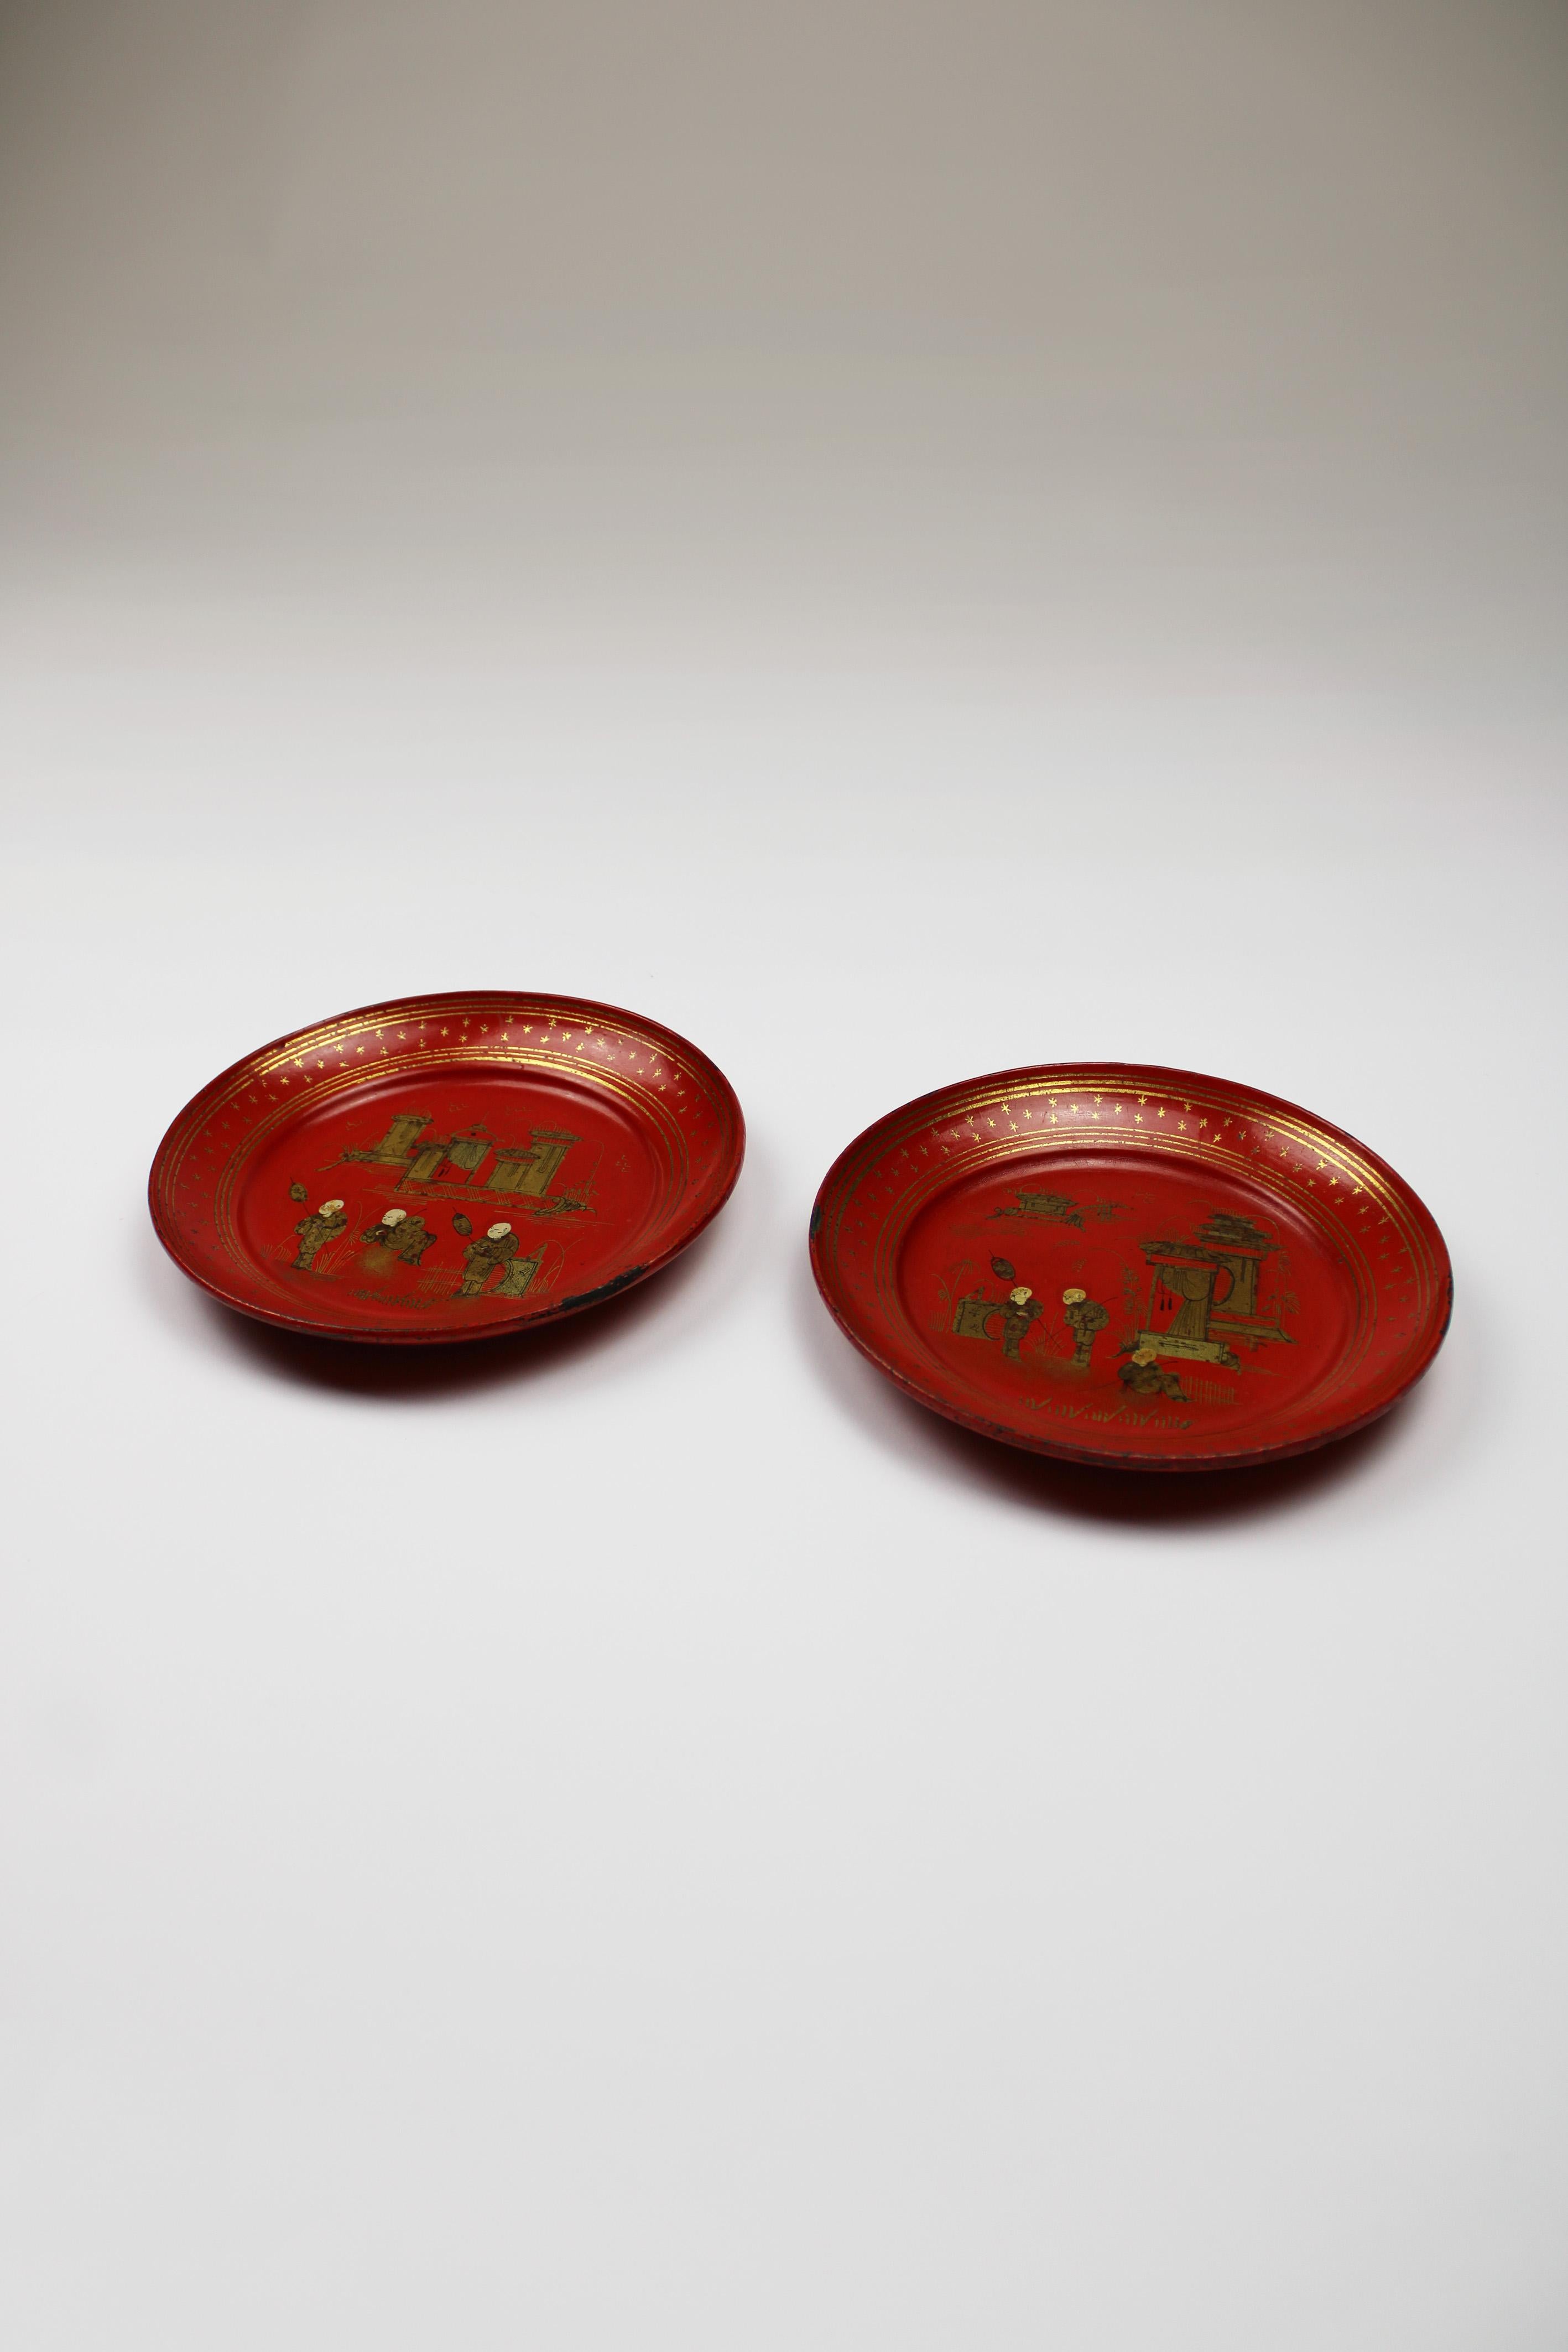 These two bottle coasters instantly catch the eye with their vibrant red hue and intricate gold Chinese designs. Dating back to the era of Napoleon III, the last emperor of France, these coasters showcase a fusion of exotic Oriental aesthetics that